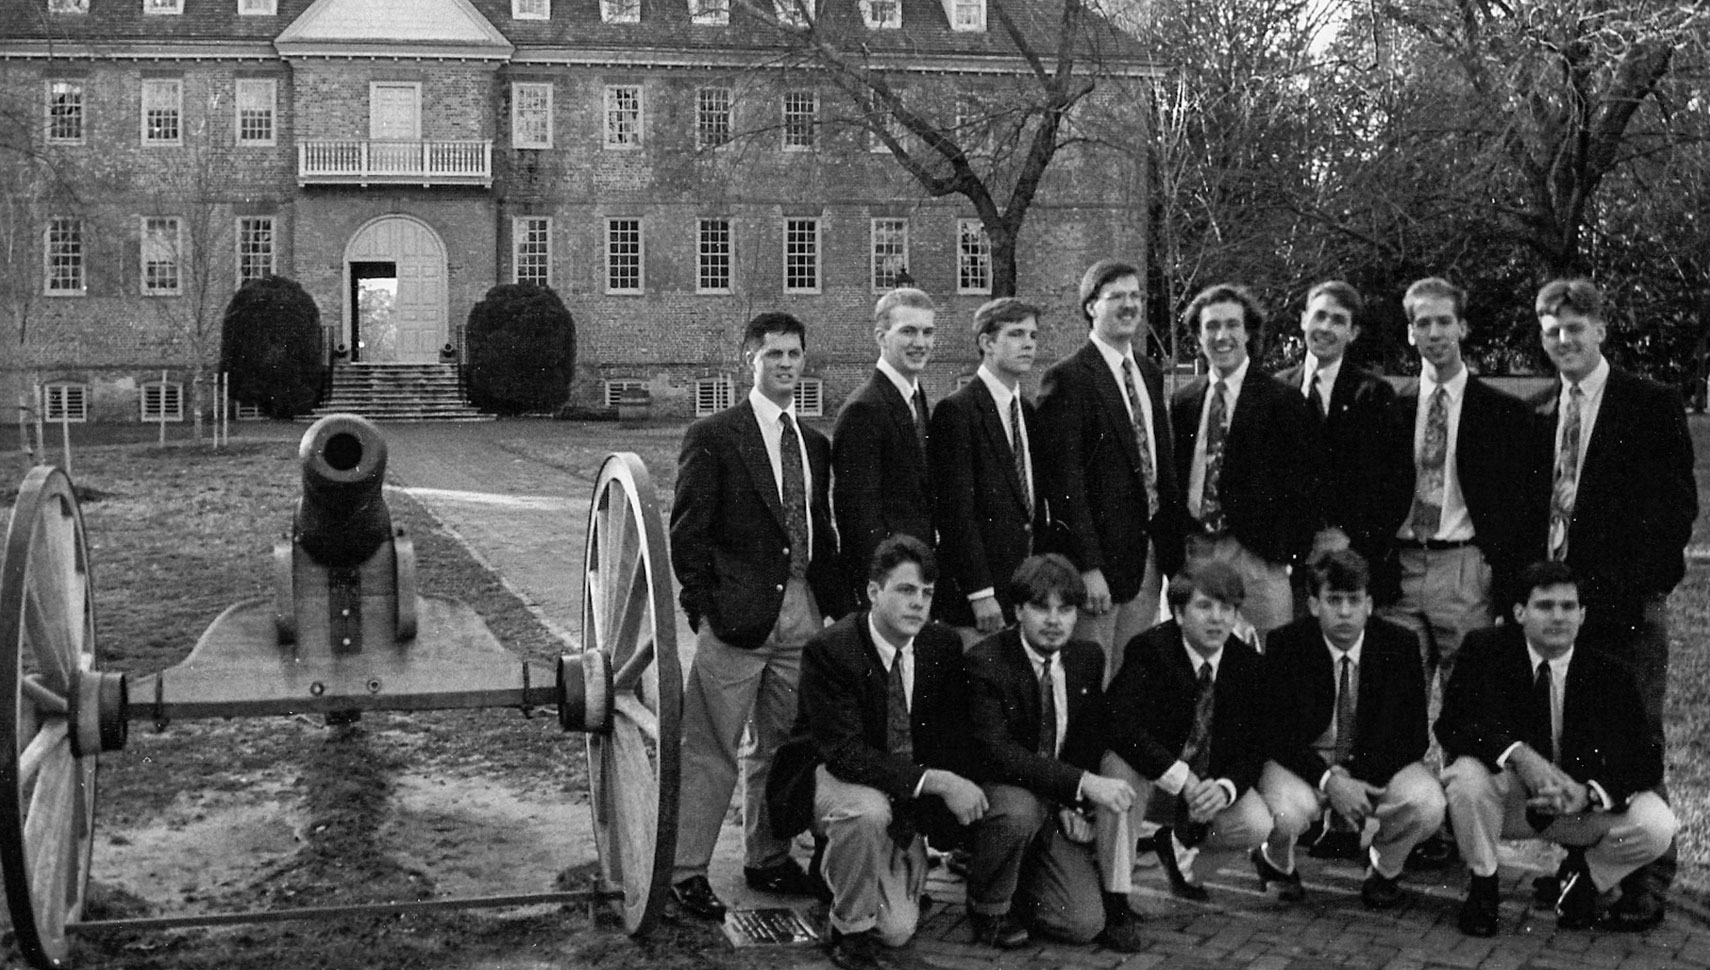 Fitch and the Gentlemen of the College pose in front of the Wren Building in 1993